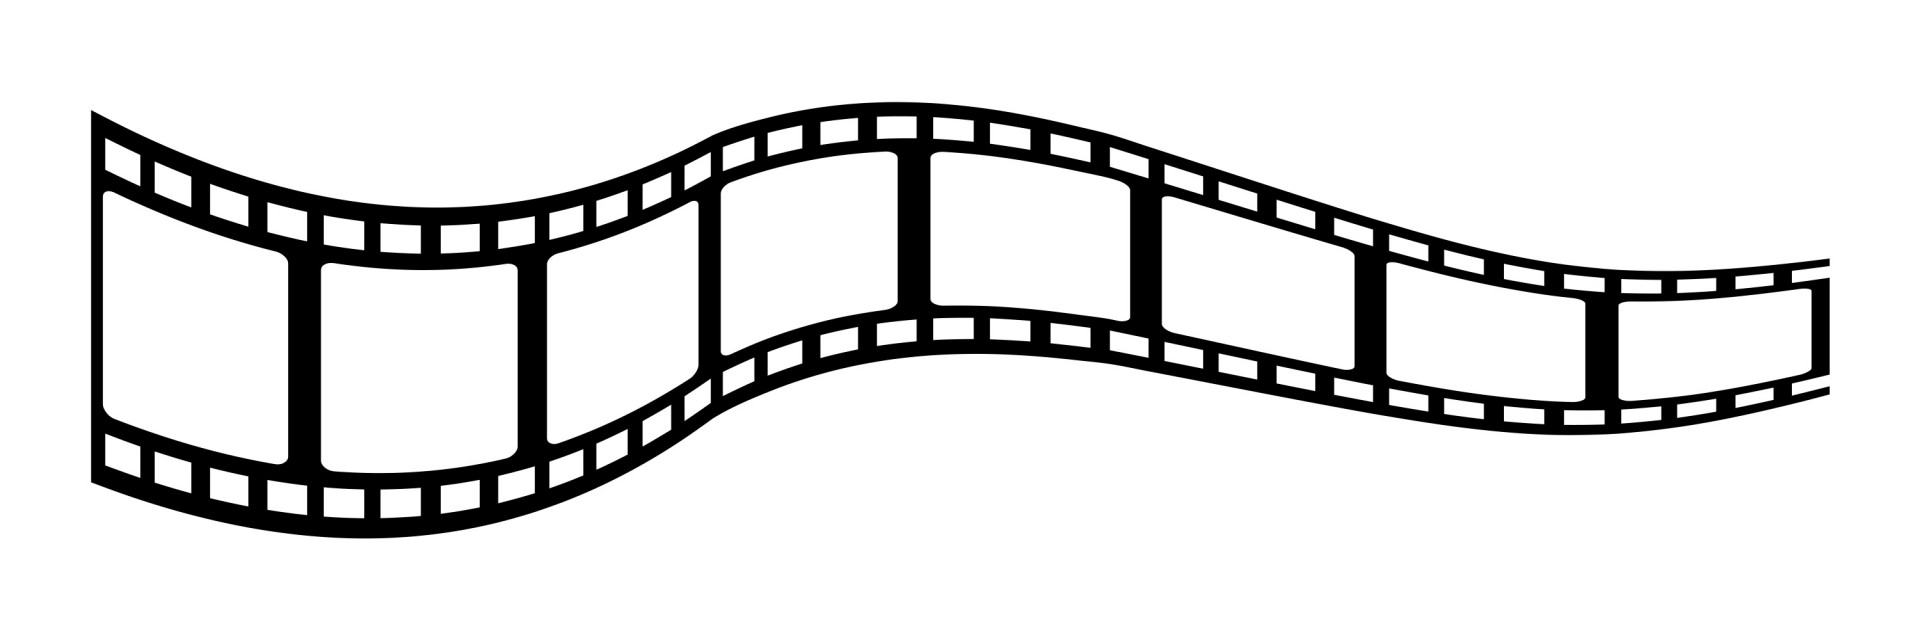 Film Strip Images Pictures Page Png Image Clipart